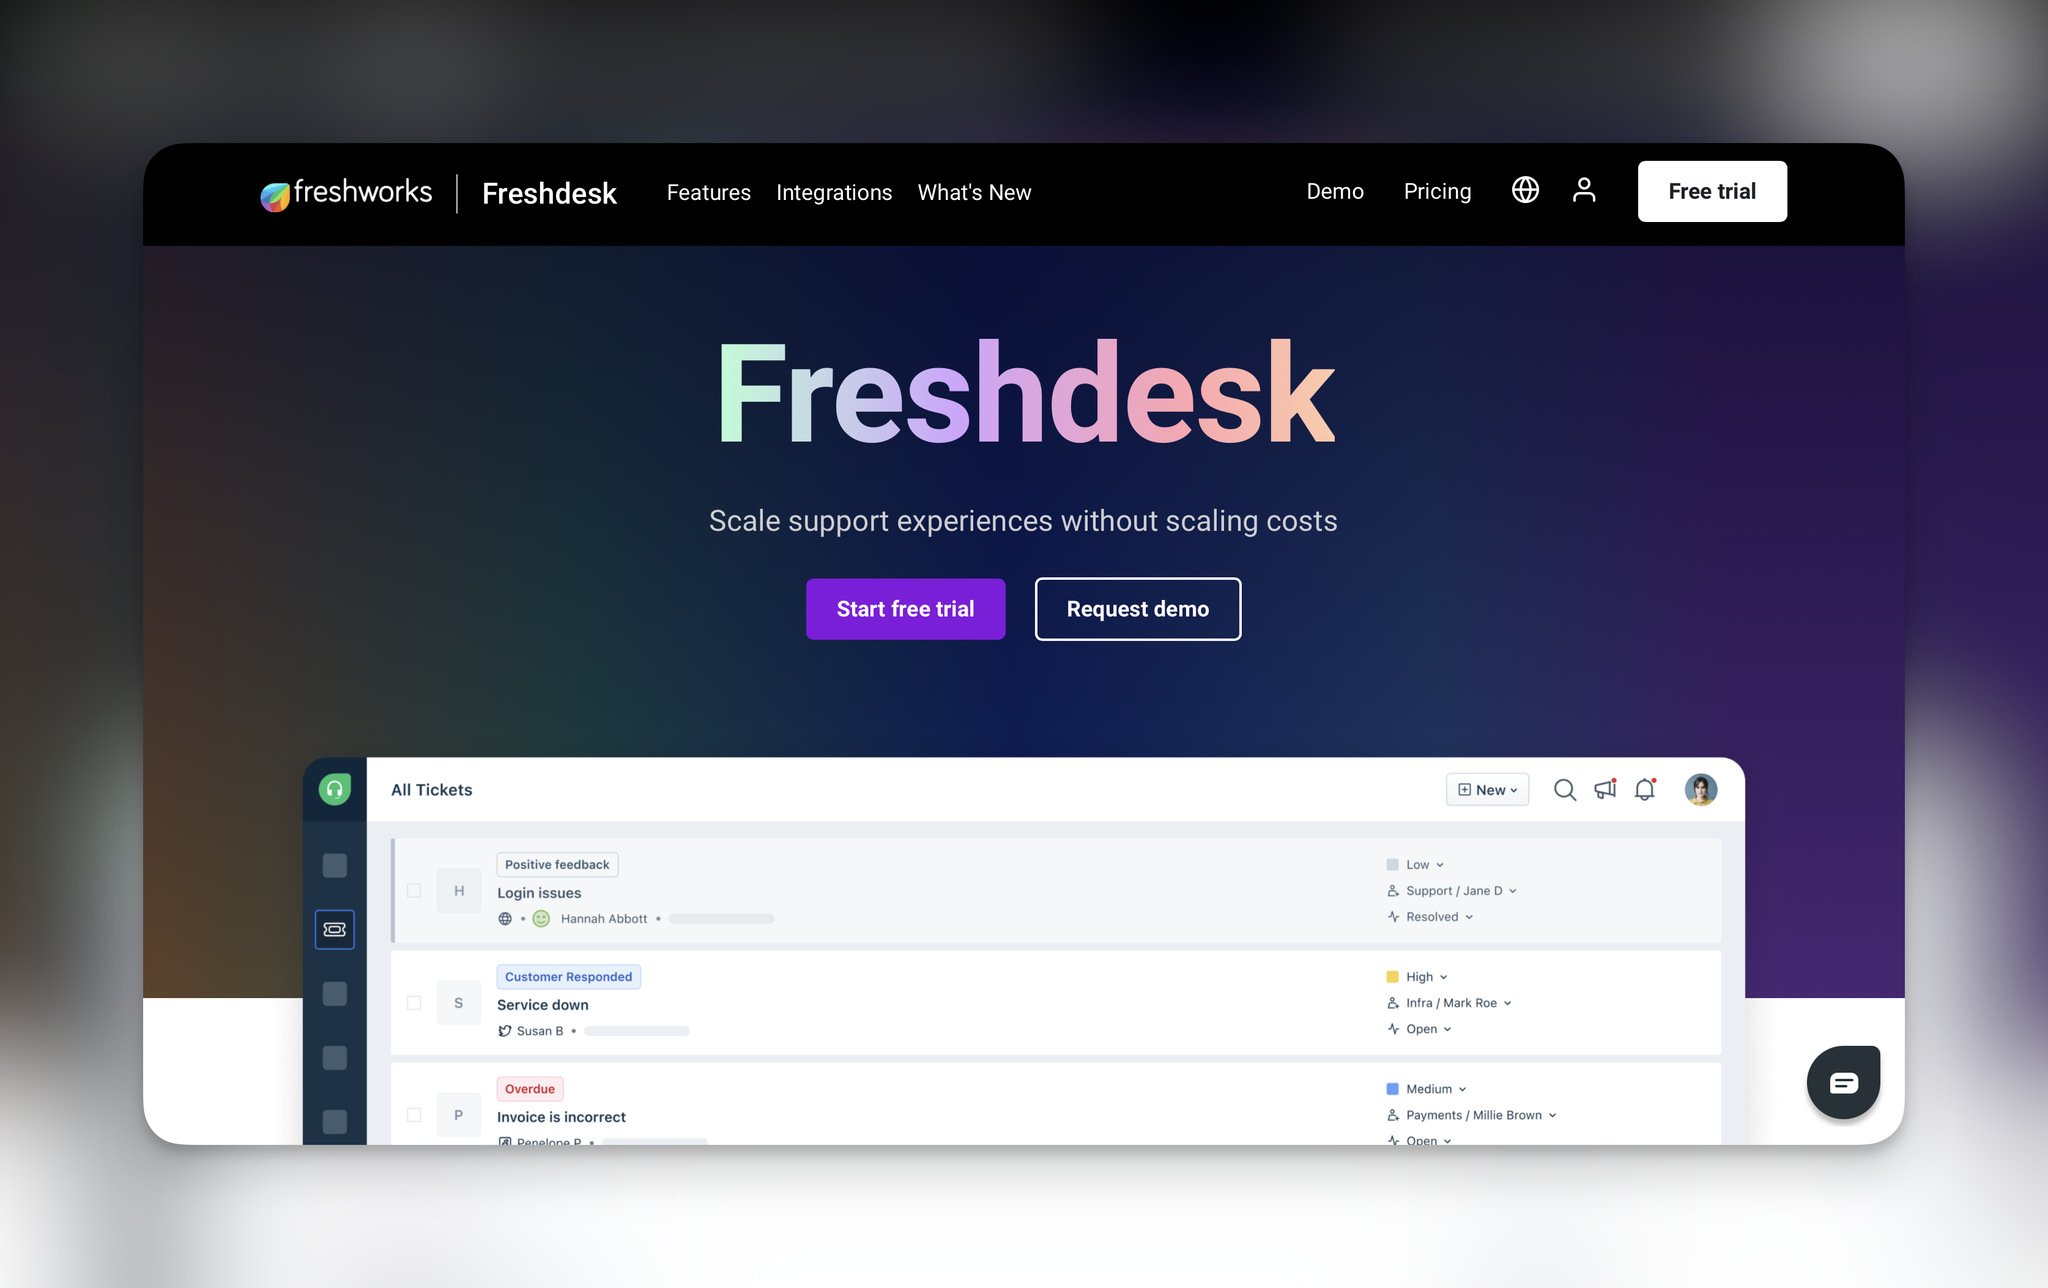 Freshdesk website with a bold "Freshdesk" headline followed by "Start free trial" and "Request demo" buttons and product interface window below